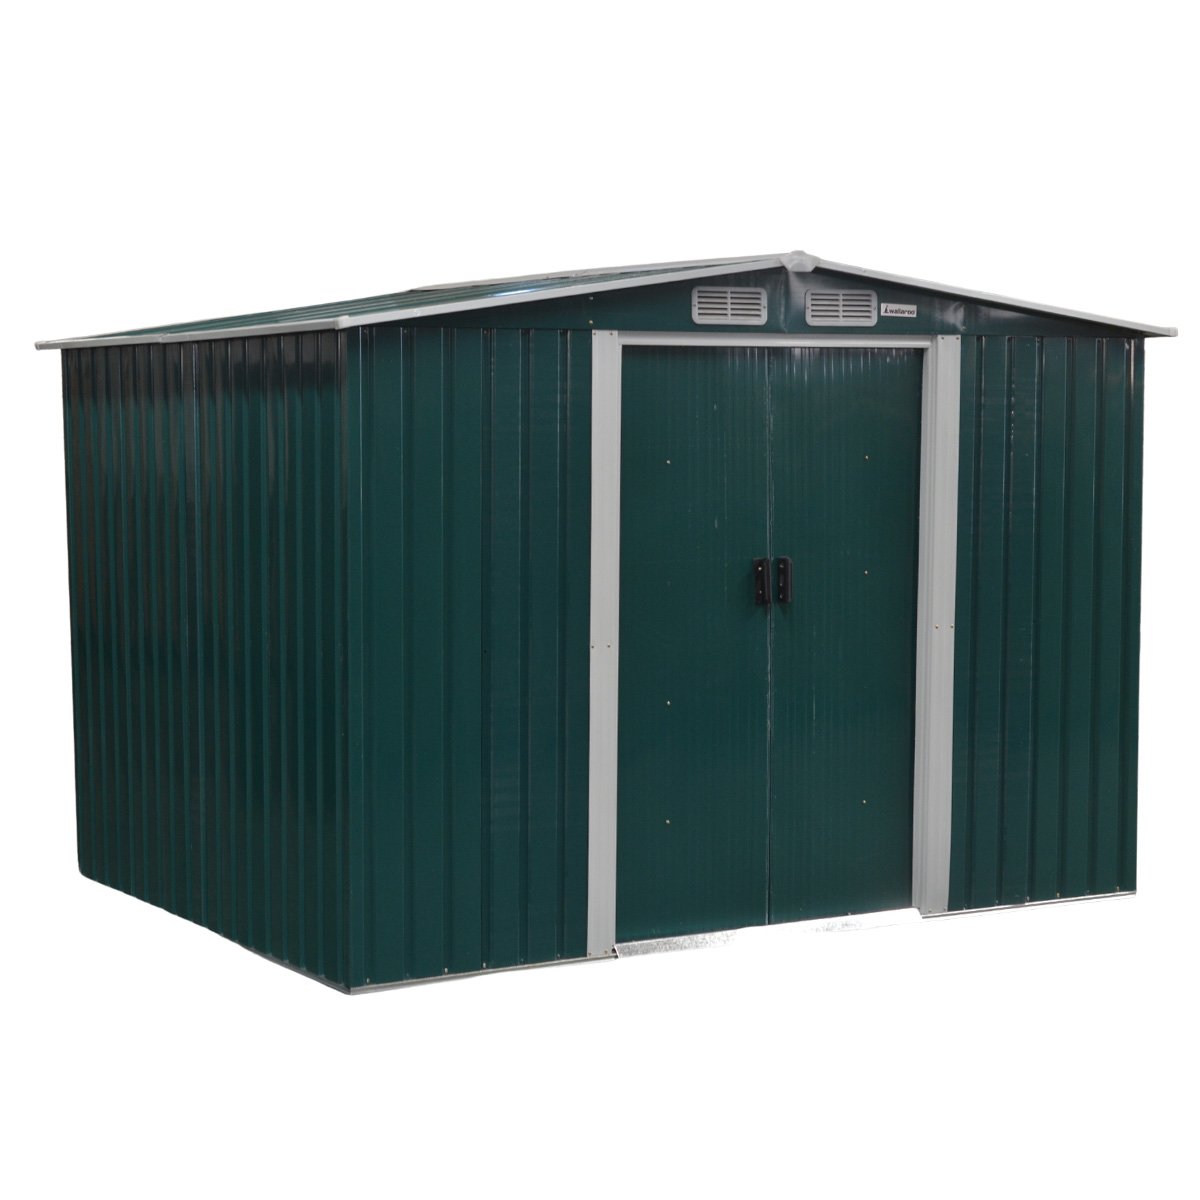 Garden Shed Spire Roof 8x8ft - Green 1